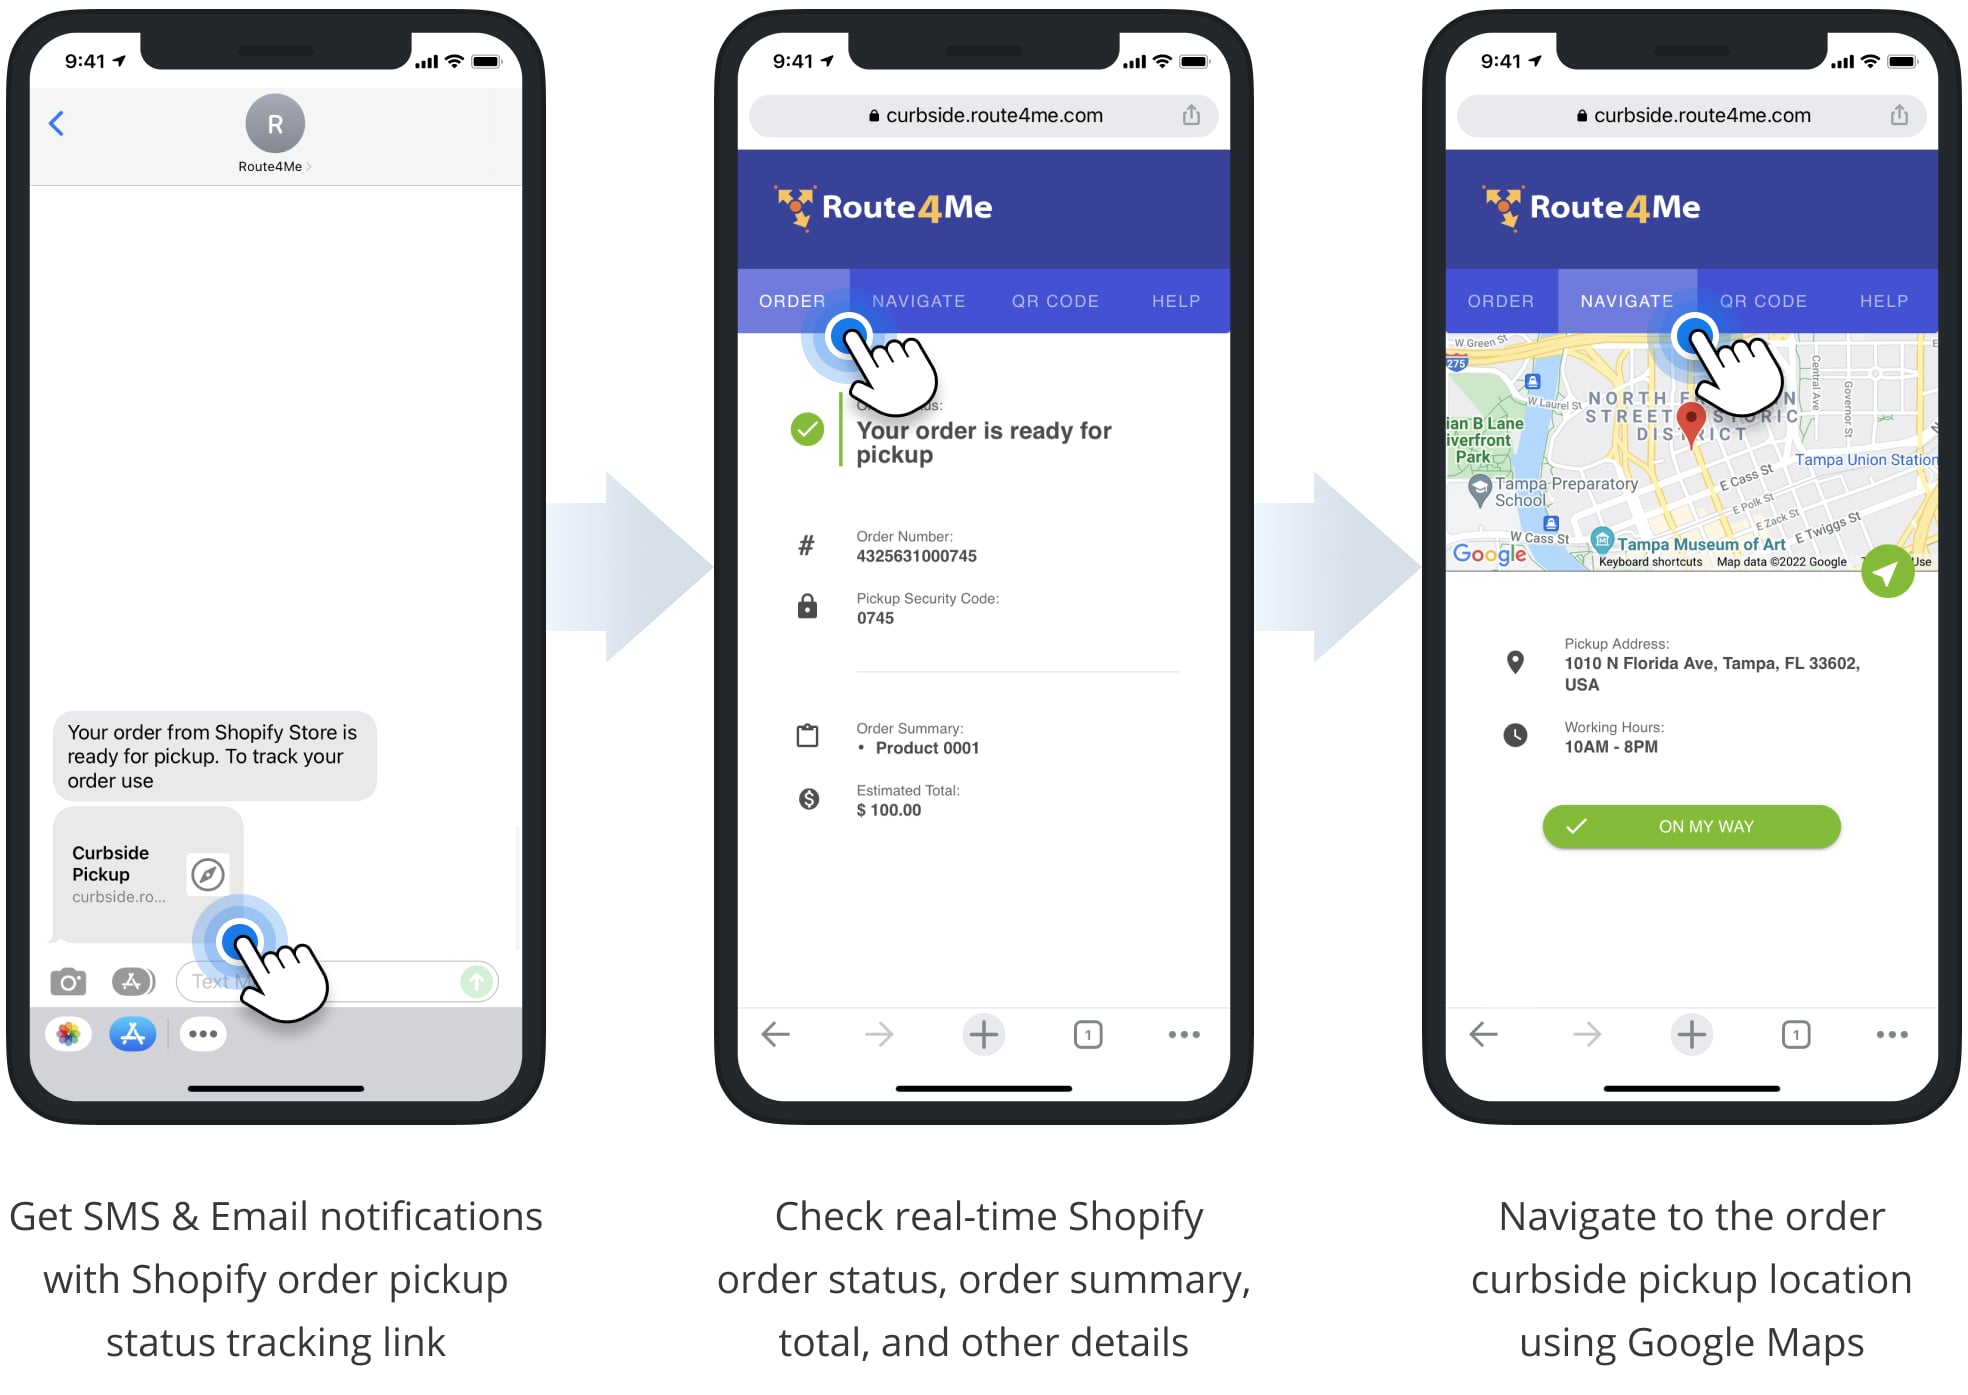 Route4Me's self-service Shopify Curbside Pickup Order Tracking page for customers.